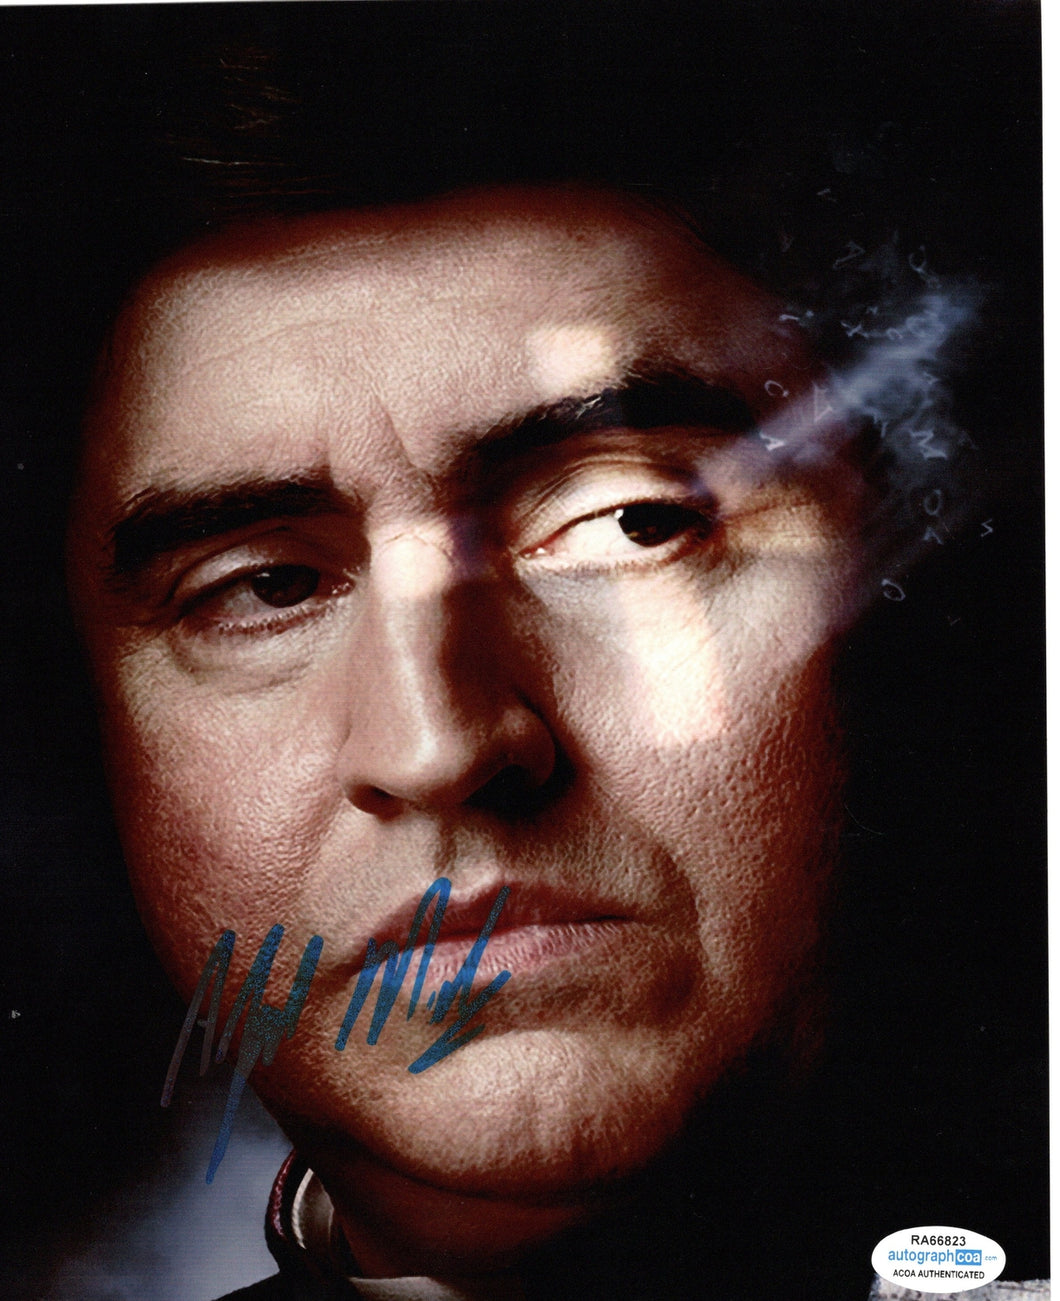 Alfred Molina Autographed Signed 8x10 Close-up Spider-Man Photo